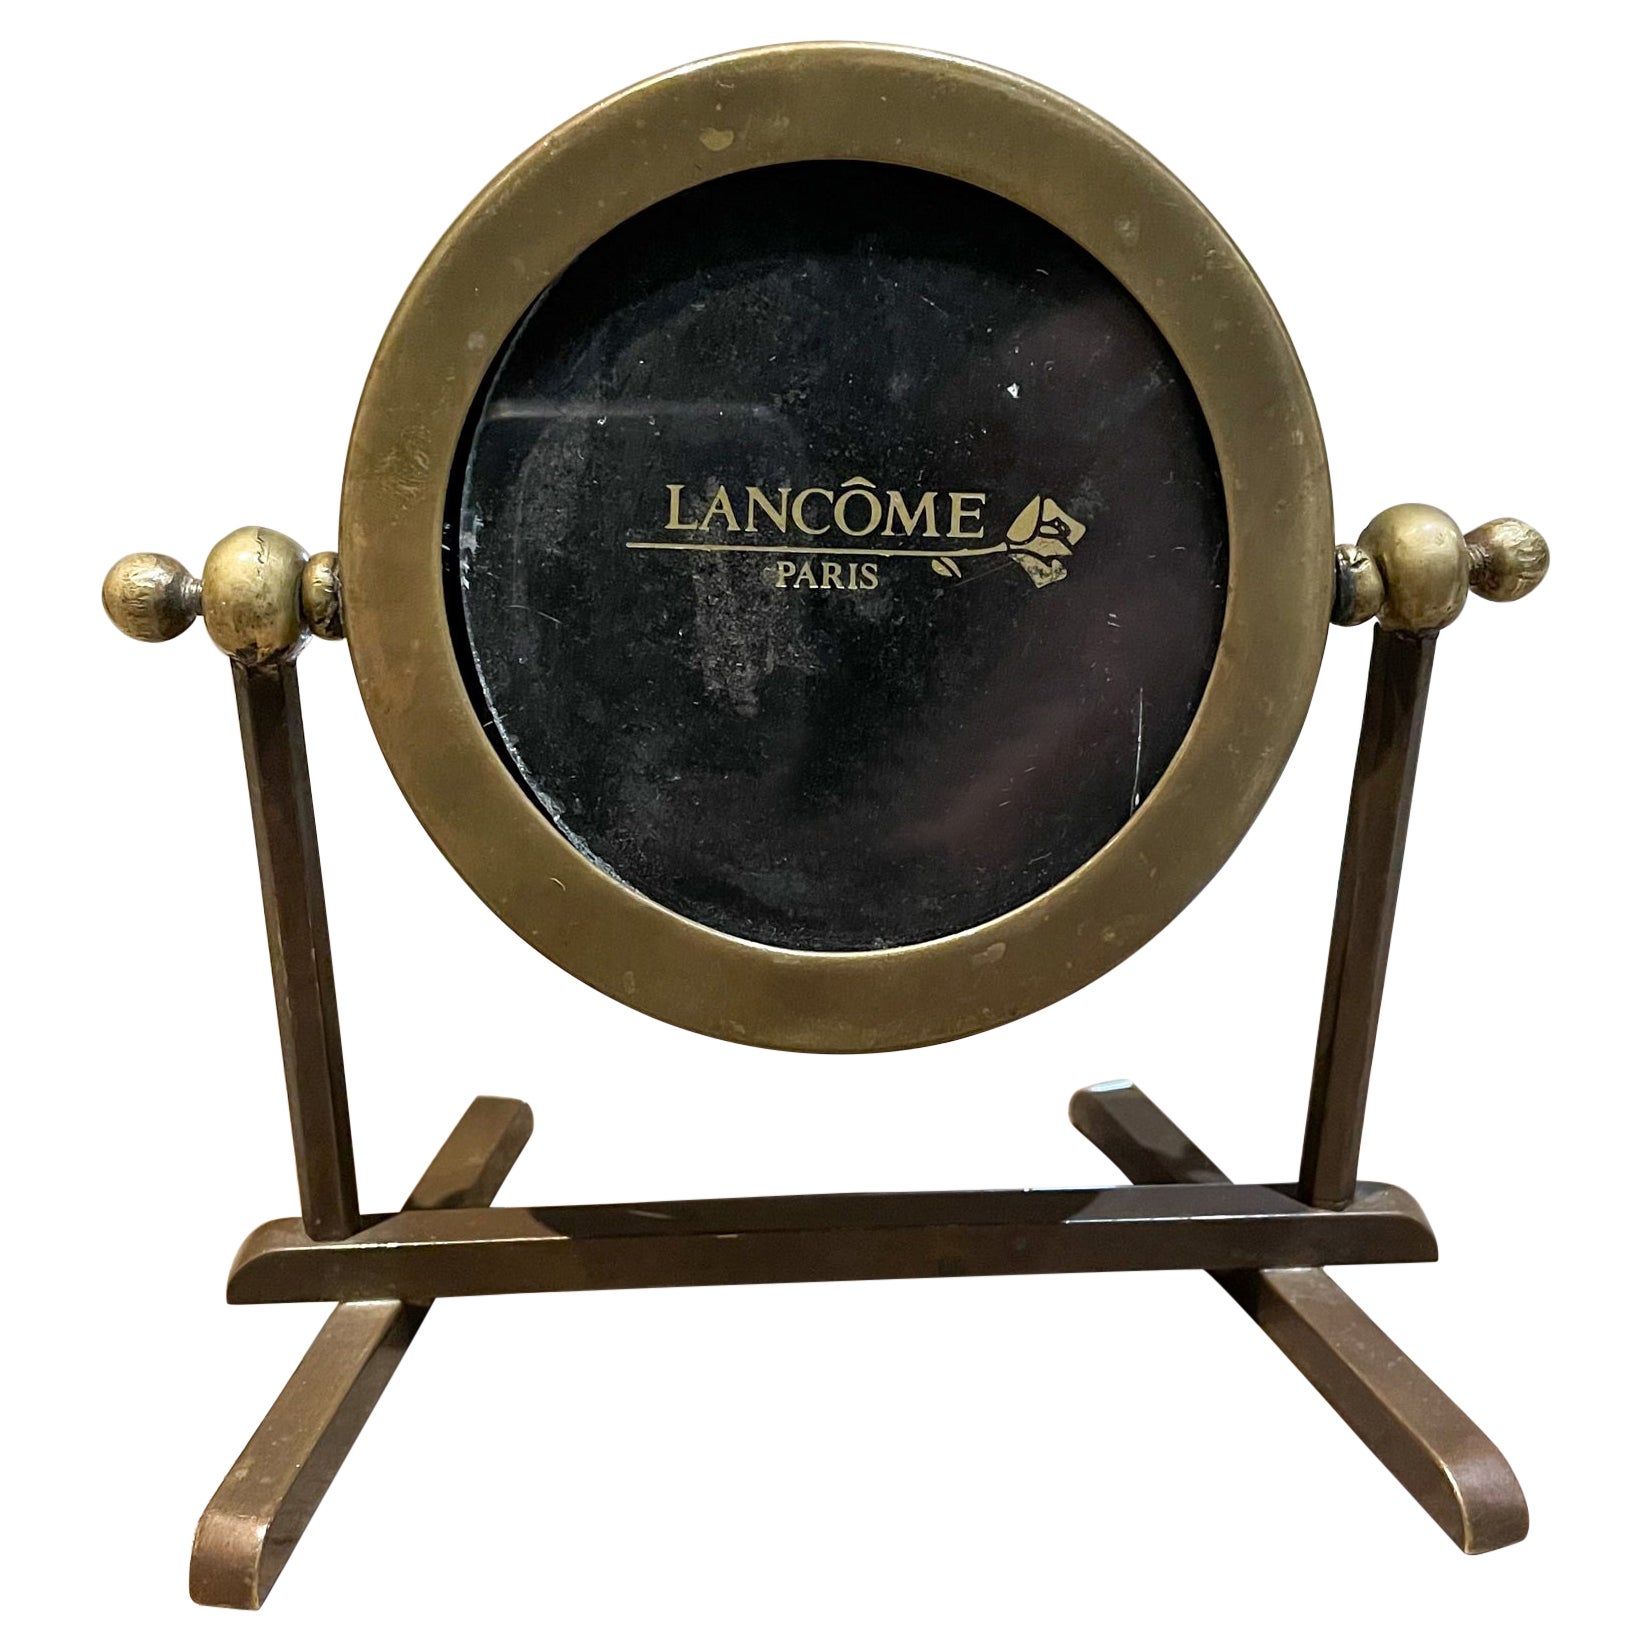 Lancome Paris Art Deco Round Brass Picture Frame on Display Stand France